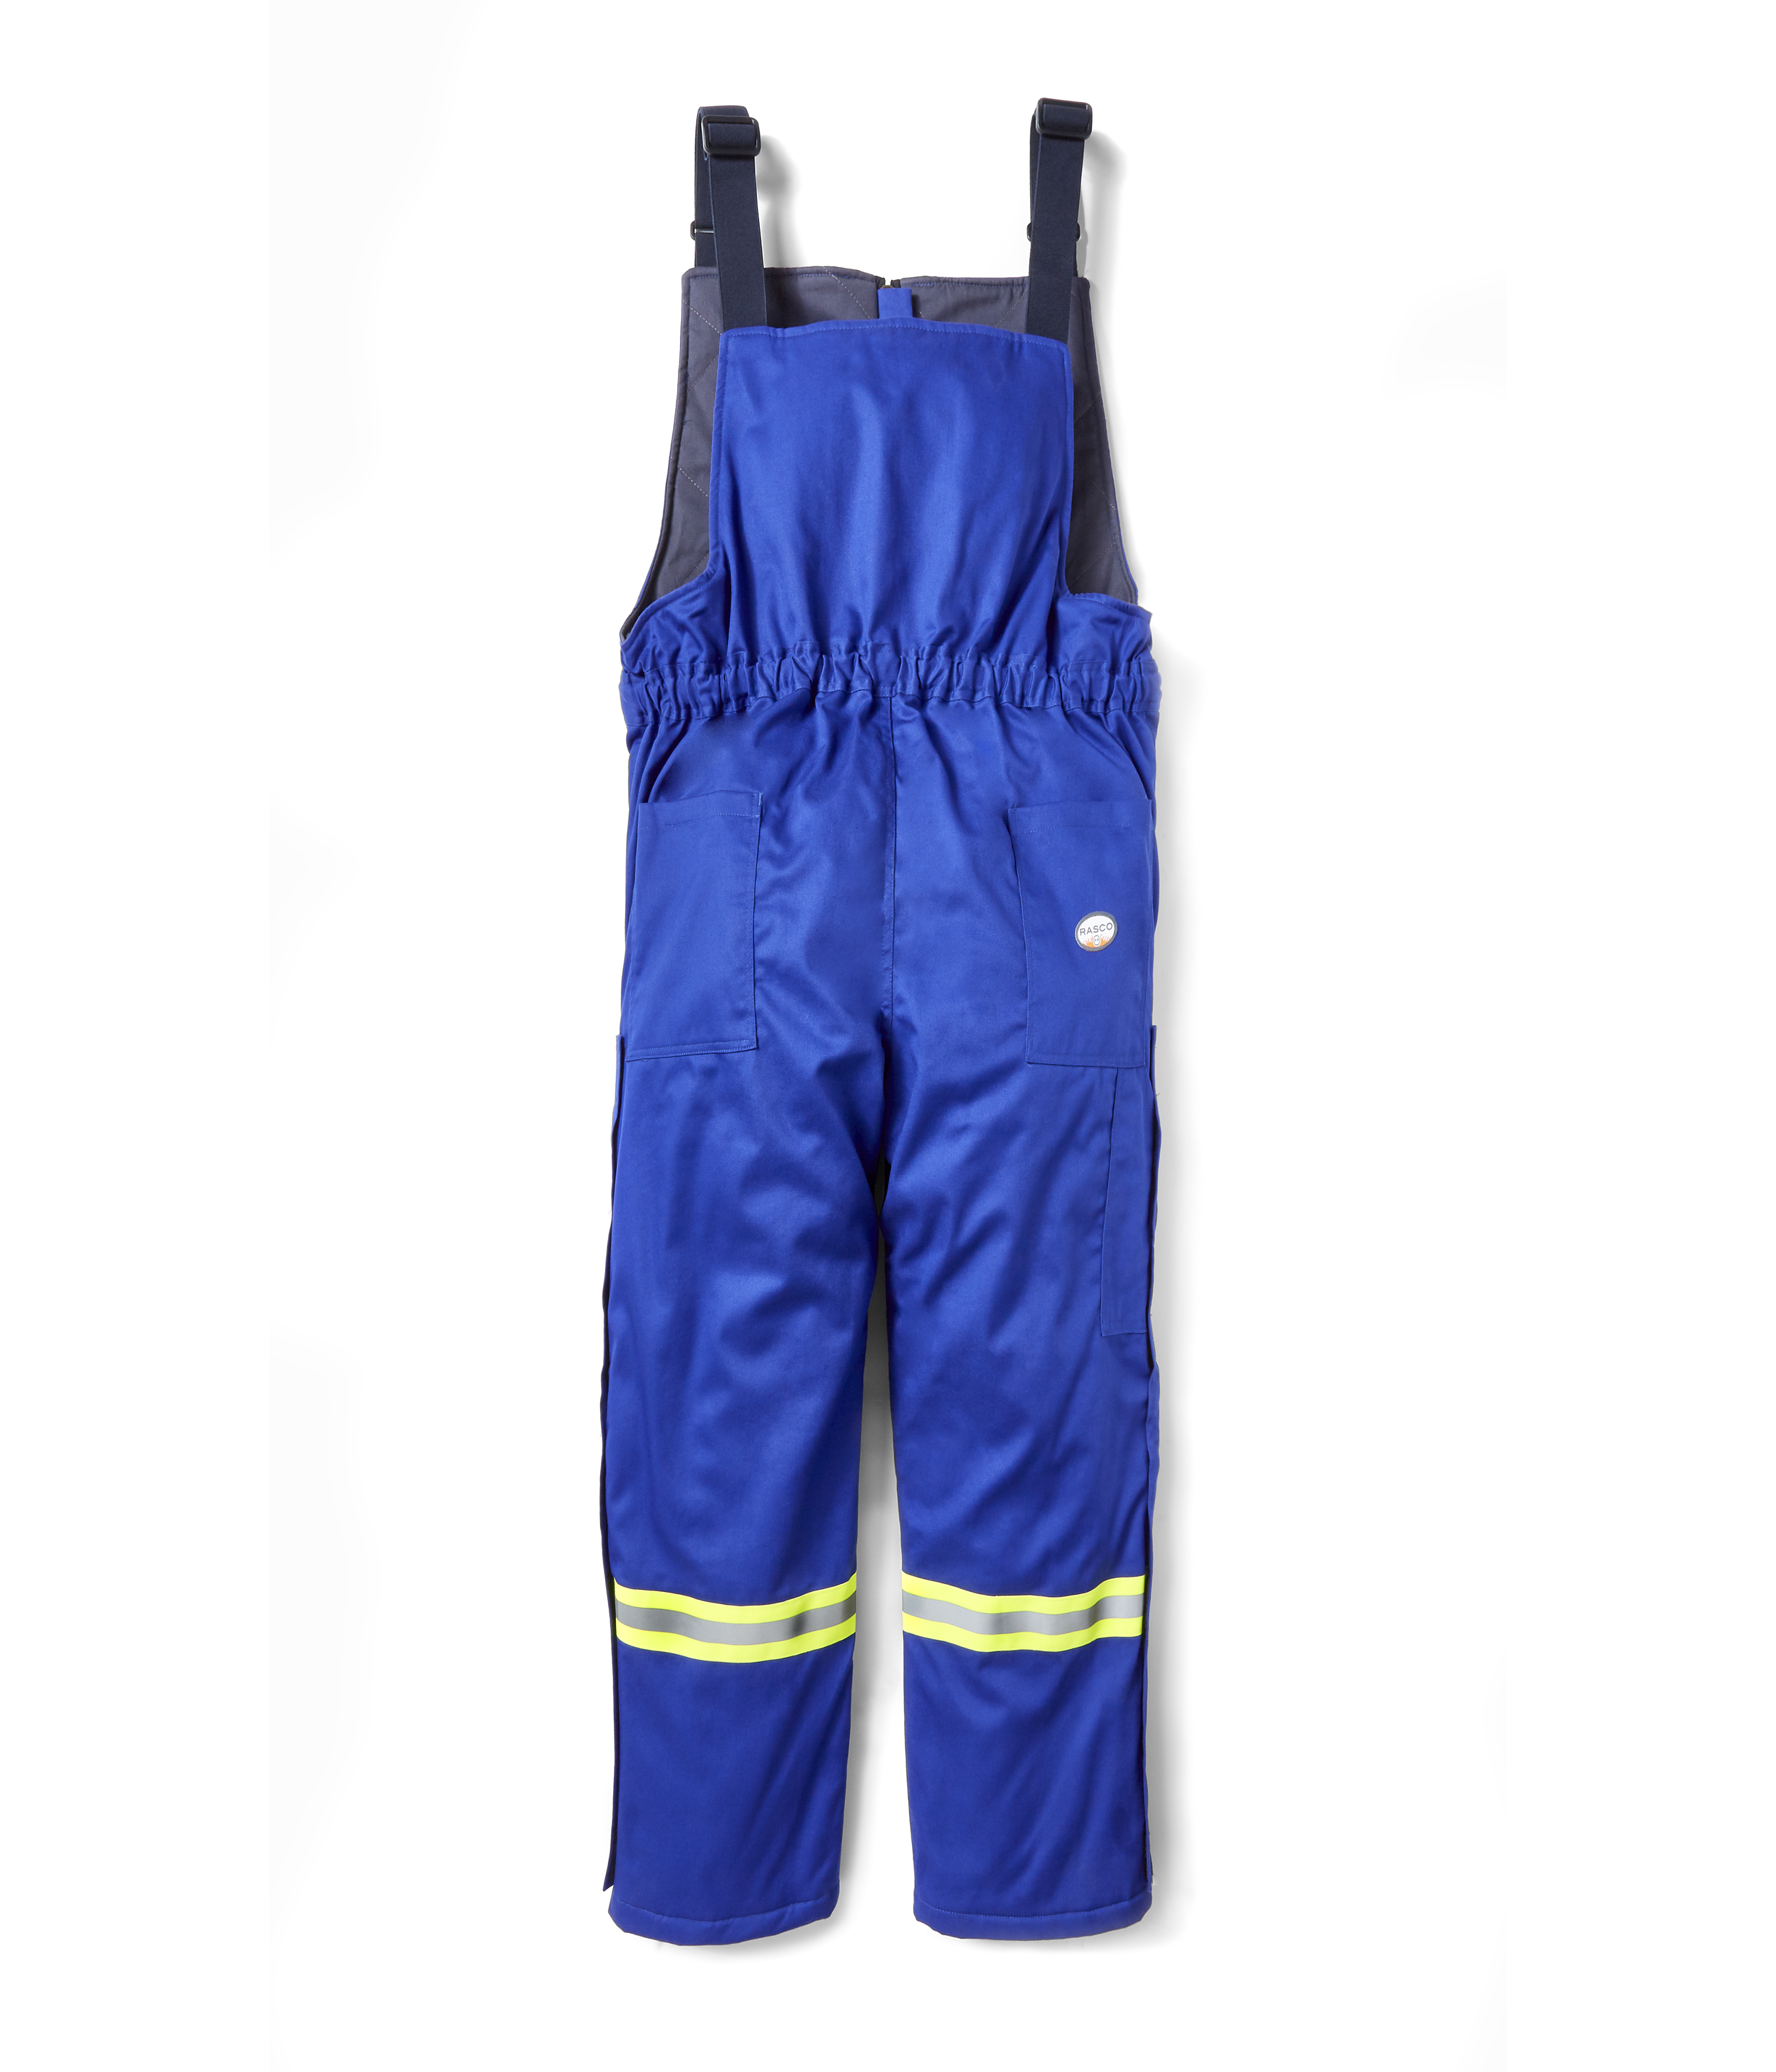 FR UltraSoft Insulated Bib Overall with Reflective Trim-